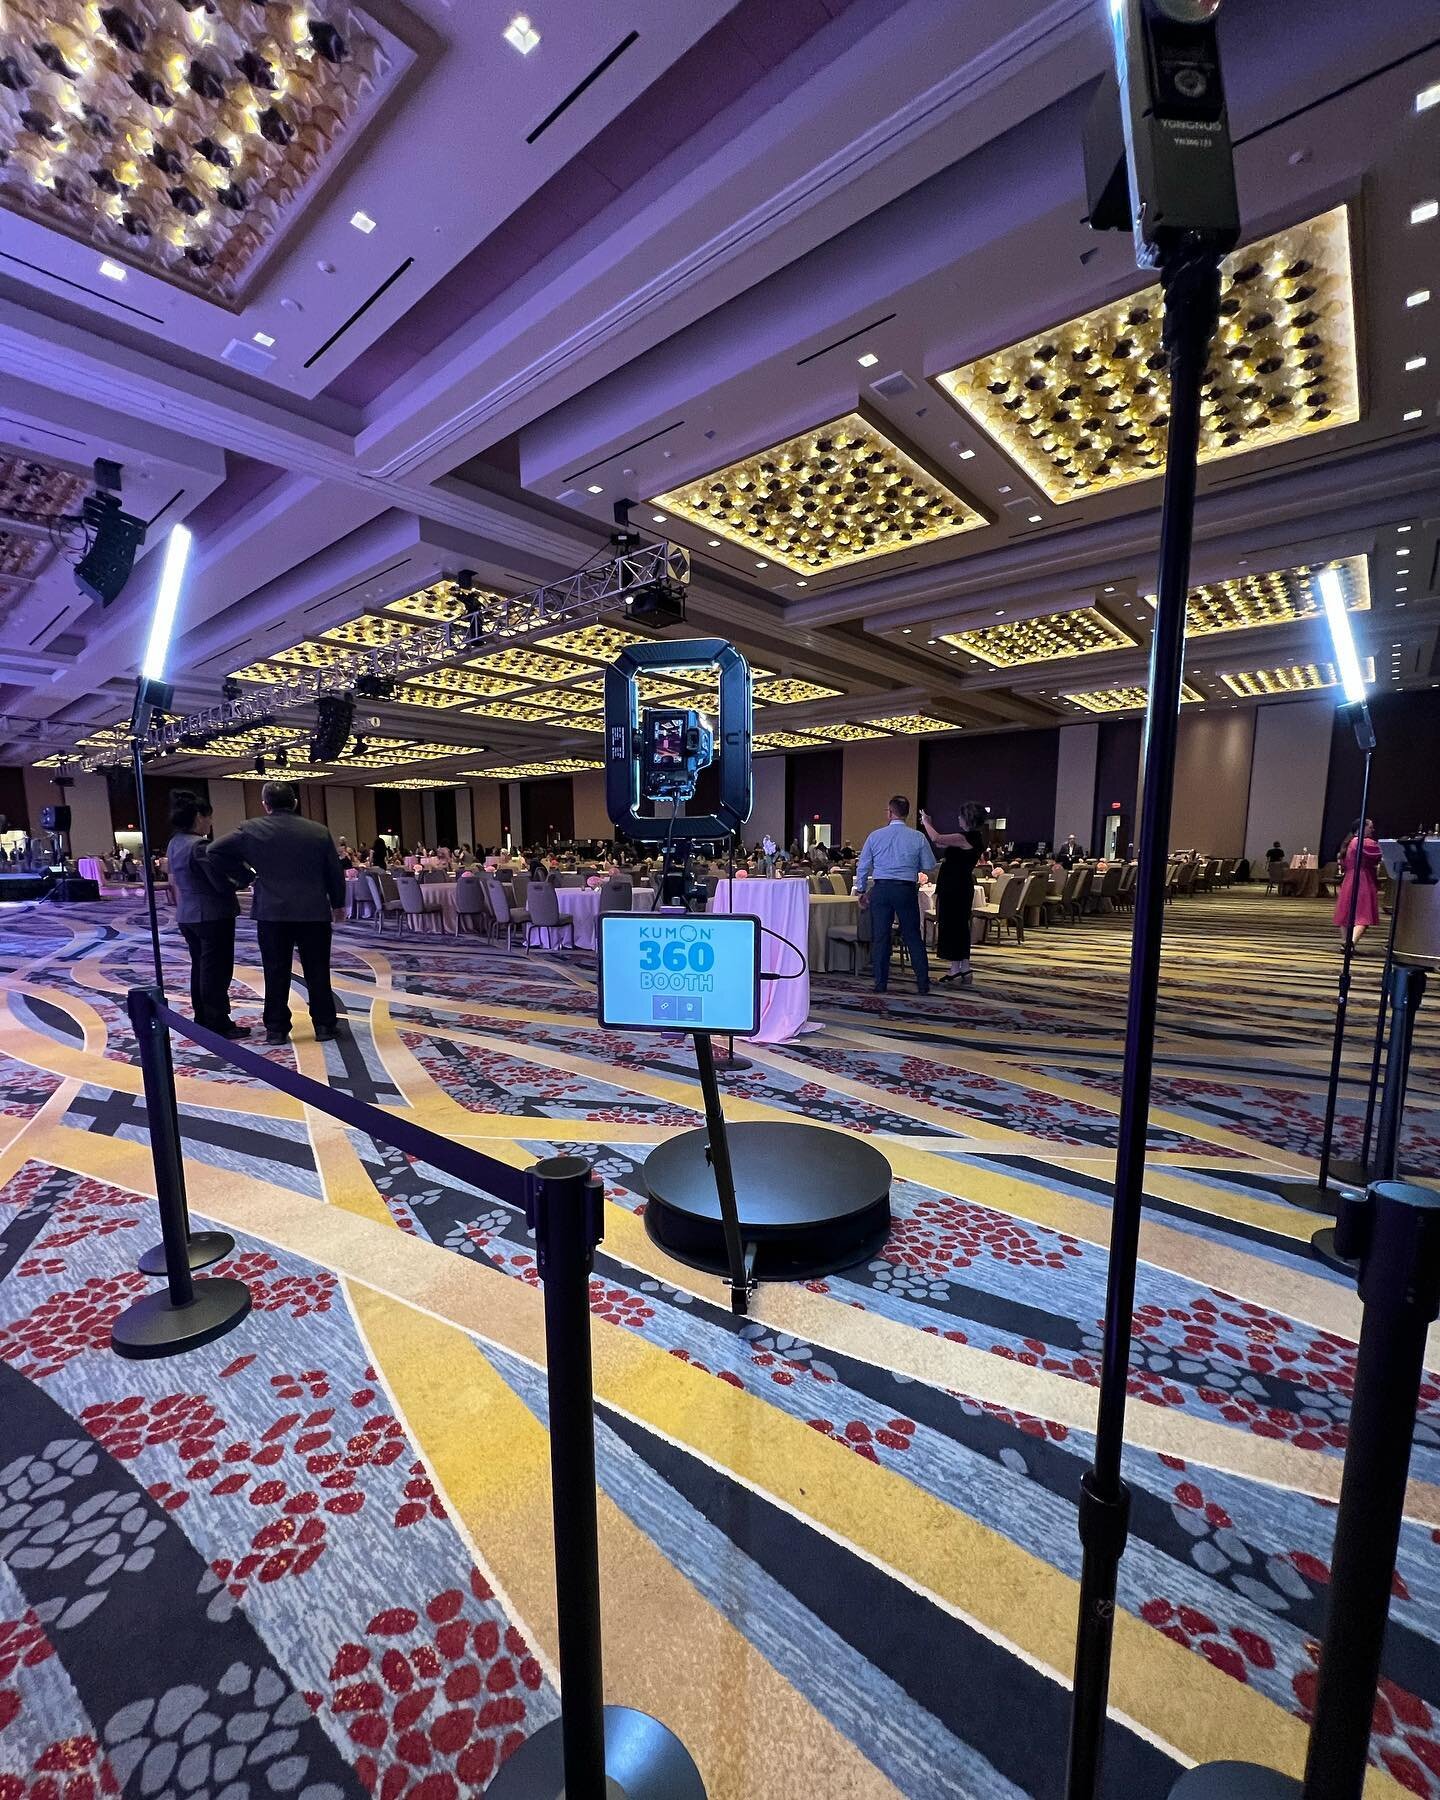 Our Photoshoot Fresh 360 Booth was on fire non-stop for 3 hours at an event at the @mhmarquiswdc a couple weeks ago. Send us a message if you need one for your next big event! #photoshootfreshdc #360booth #dc #dcphotobooth #dcphotoboothrental